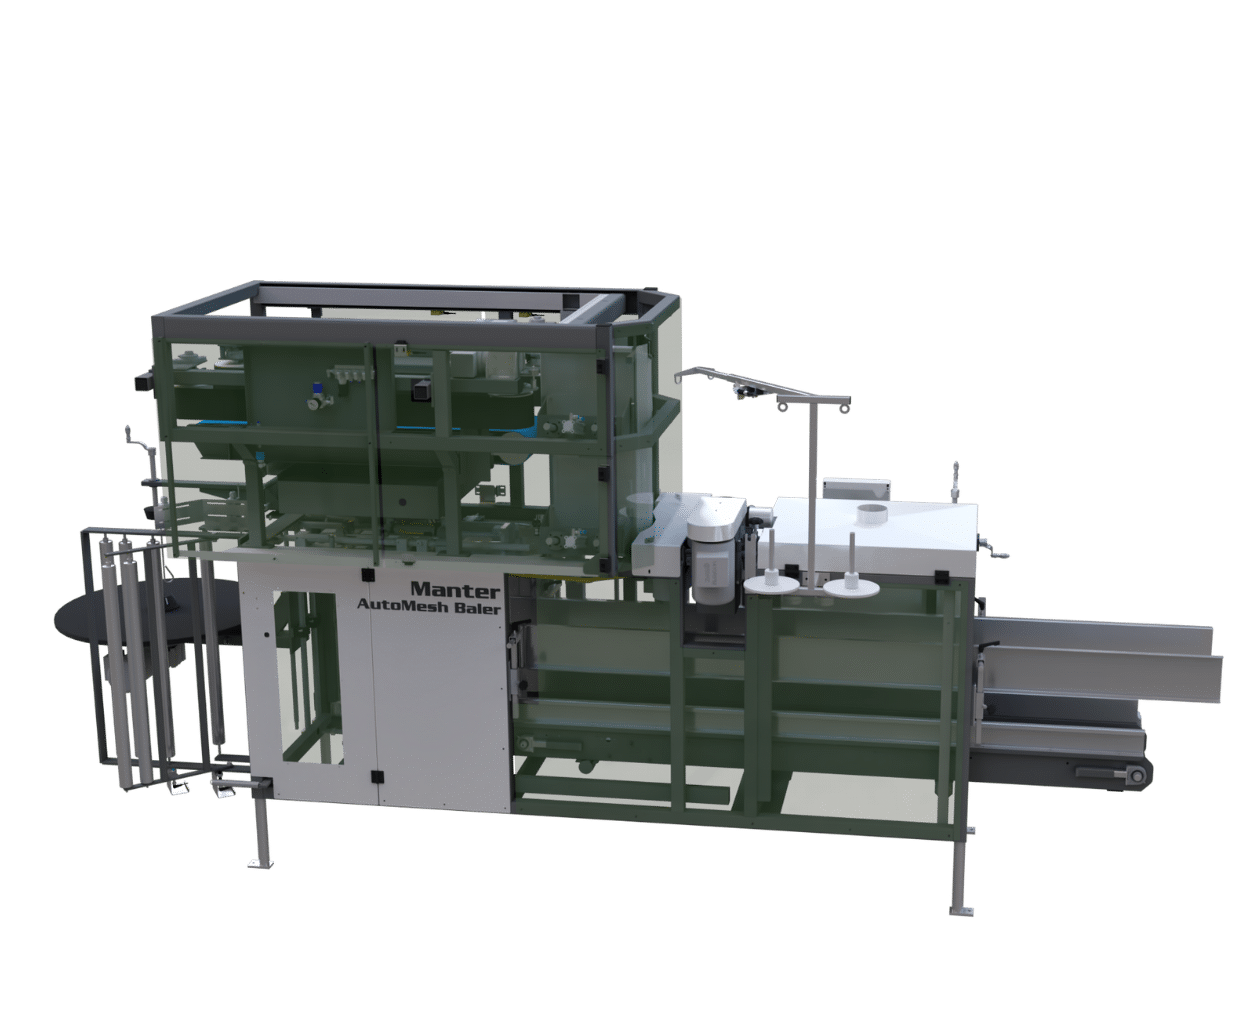 AutoMesh Baler - Baler for smaller packaging in a net bag from the roll